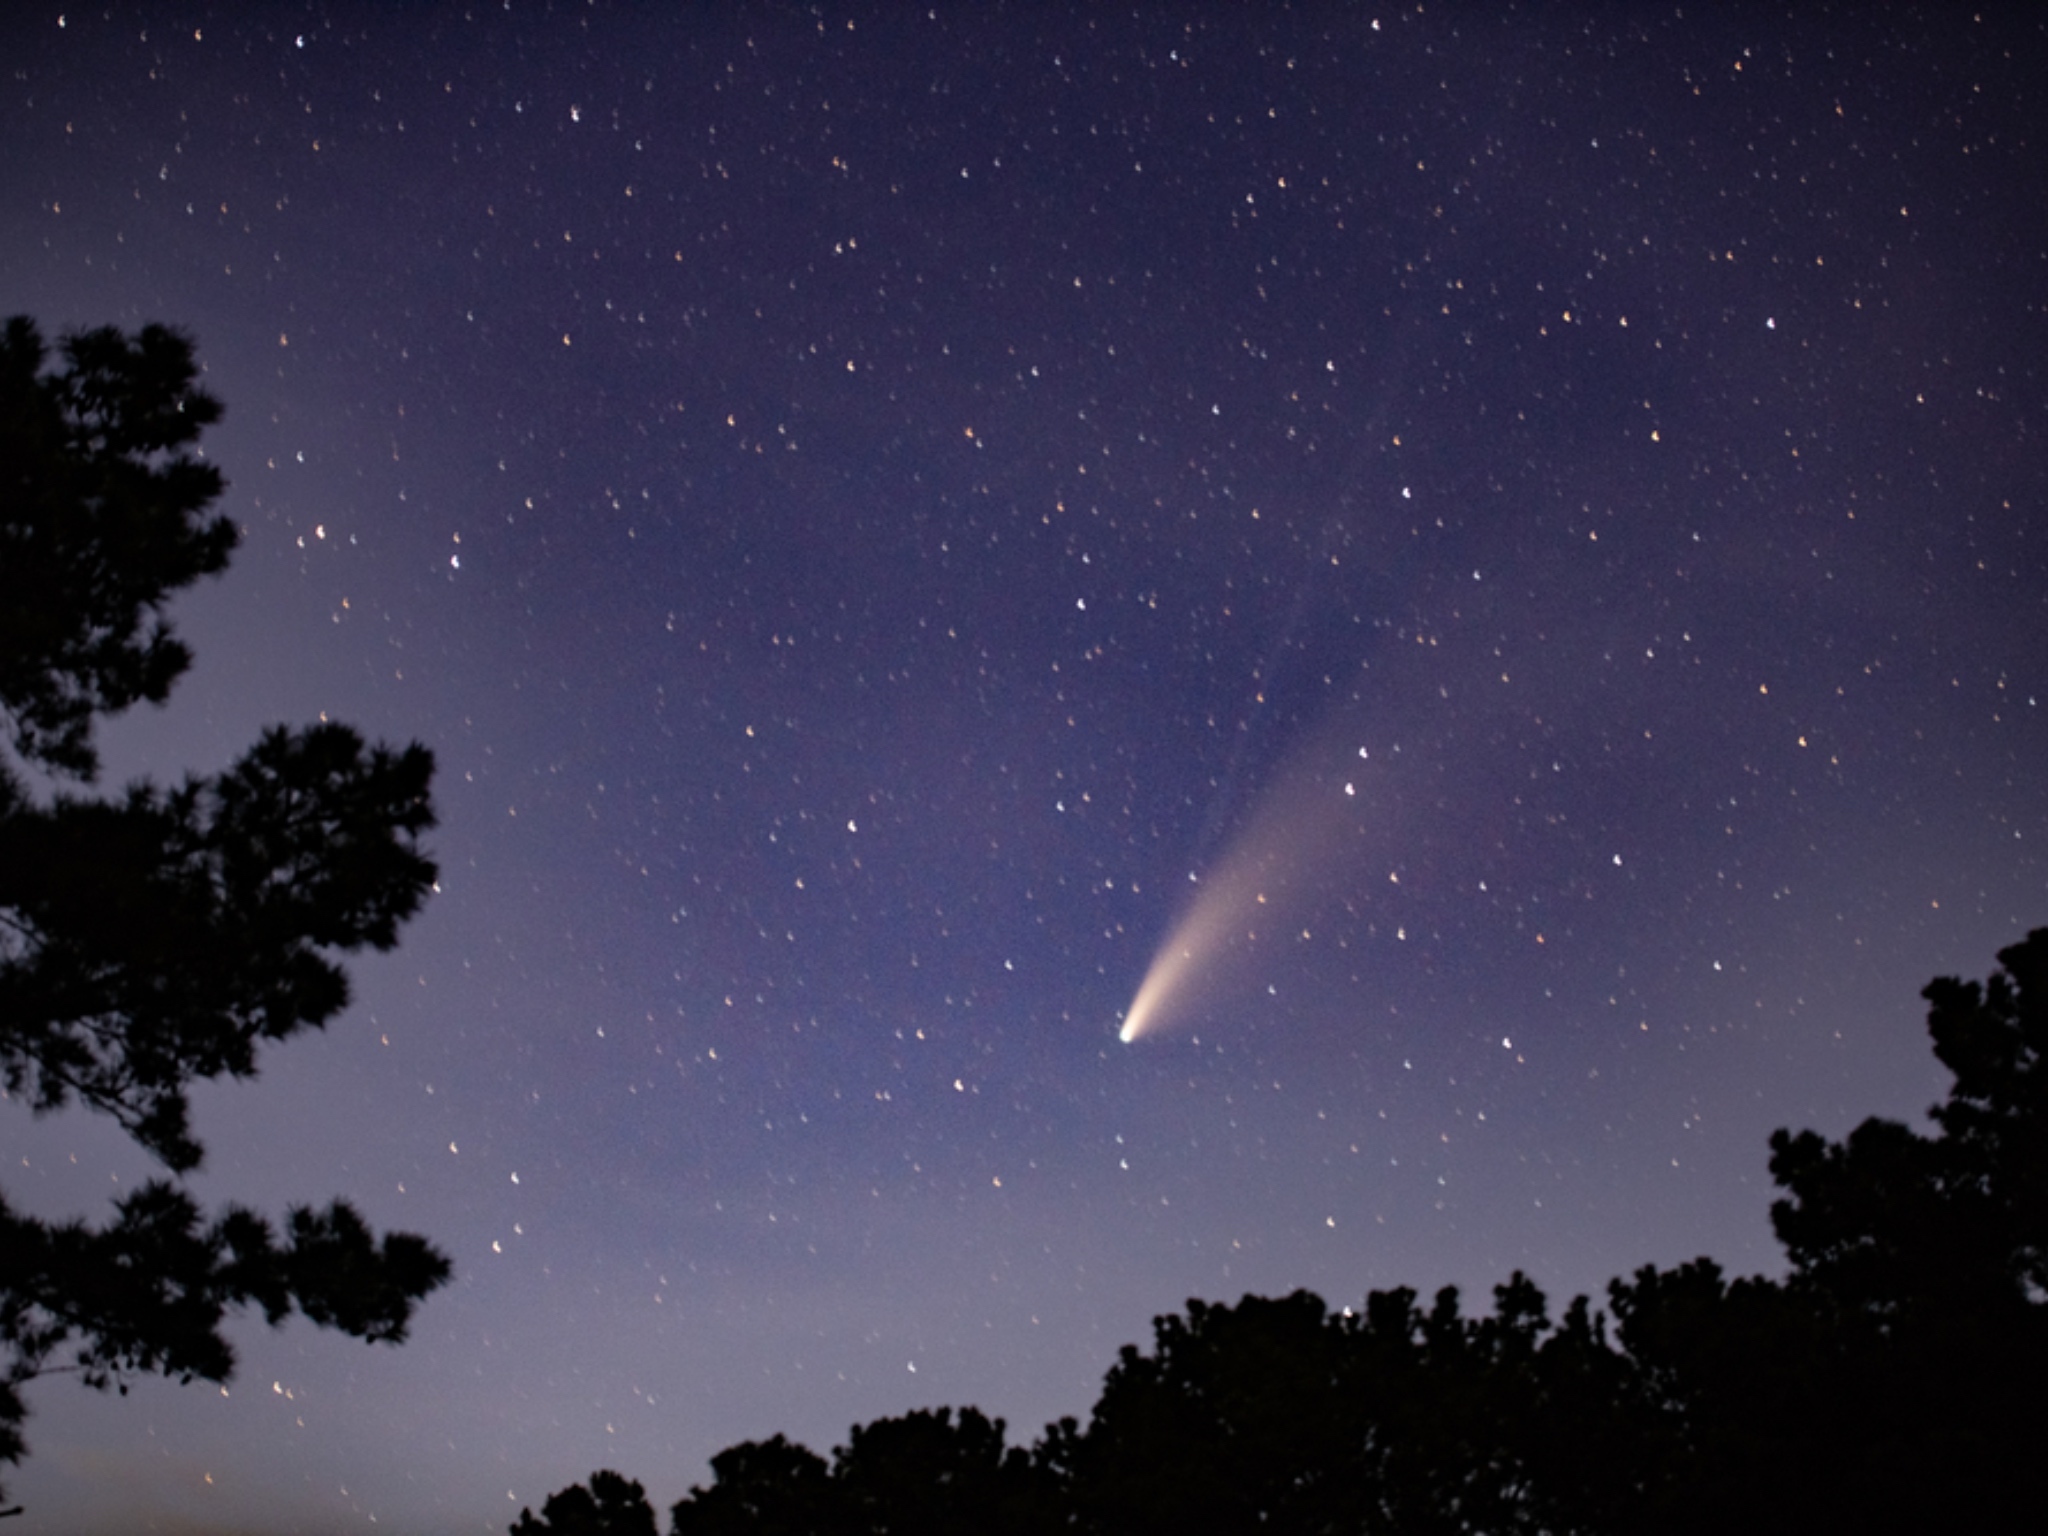 Halley's Comet appeared in the sky when Mark Twain was born in 1835. The comet moves in a seventy-five or seventy-six-year orbit, and, as it neared Earth once again, Twain said “I came in with Halley’s Comet and I expect to go out with it.” Sure enough, he died on April 21, 1910, just as the comet made its next pass within sight of Earth. u/SuvenPan